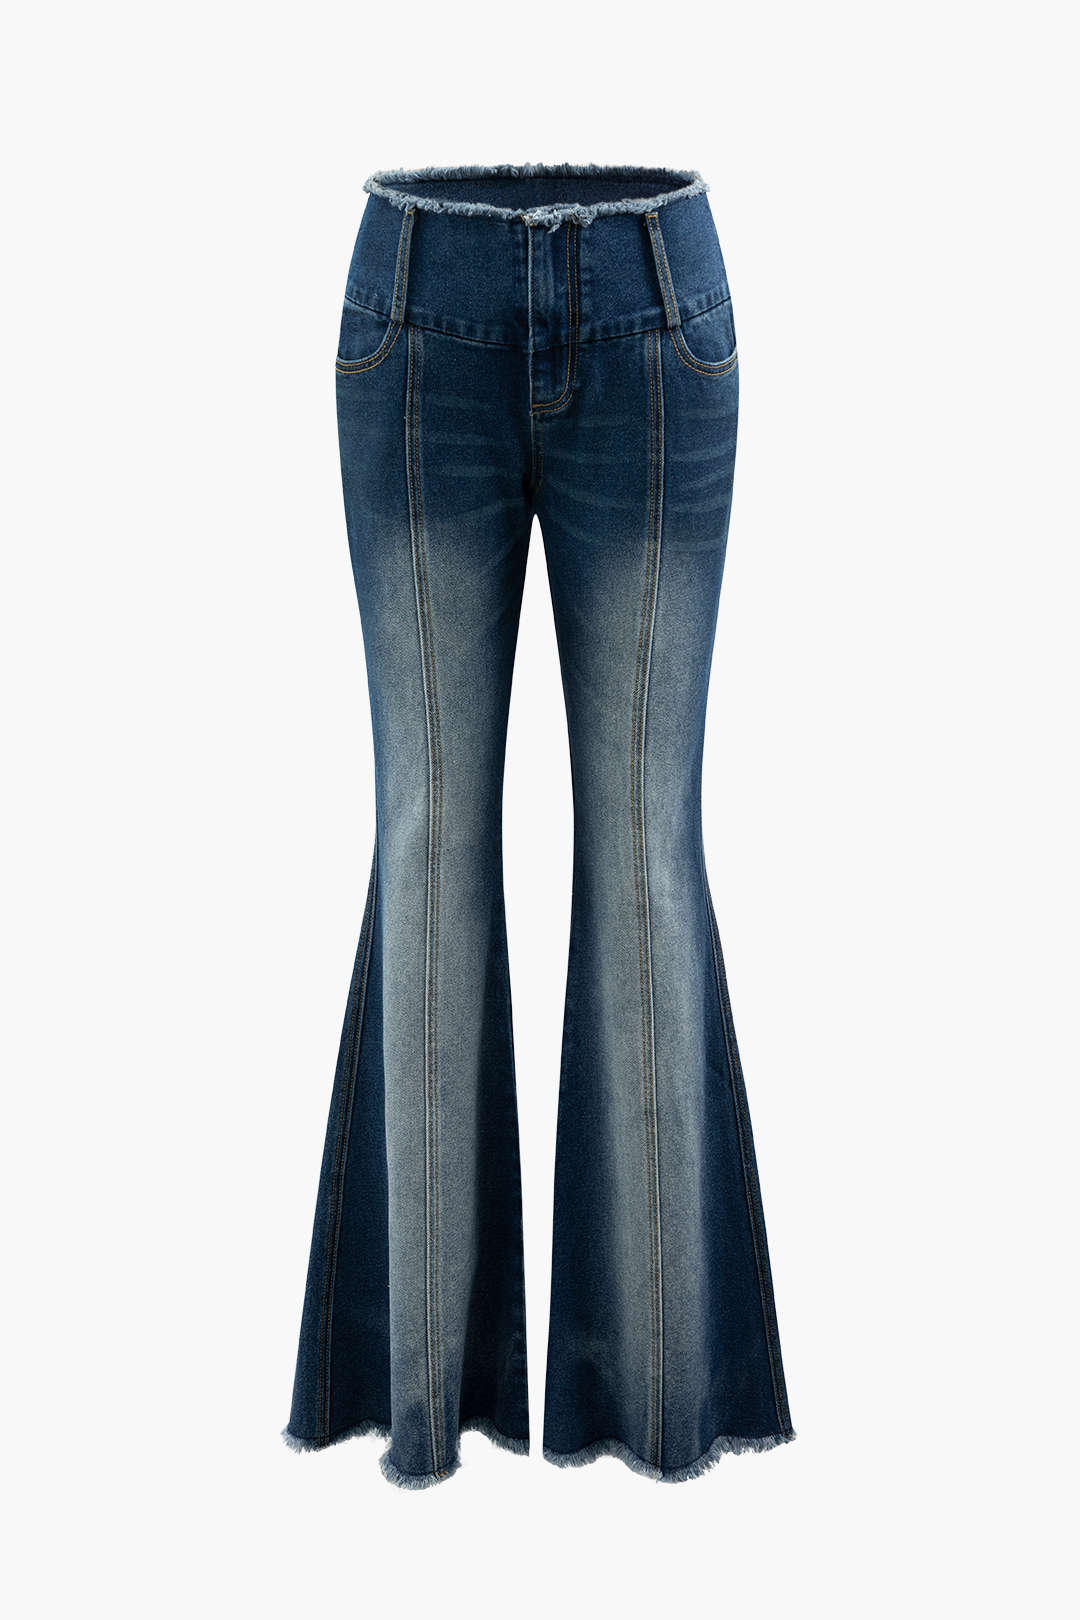 Low Rise Frayed Trim Flare Leg Jeans